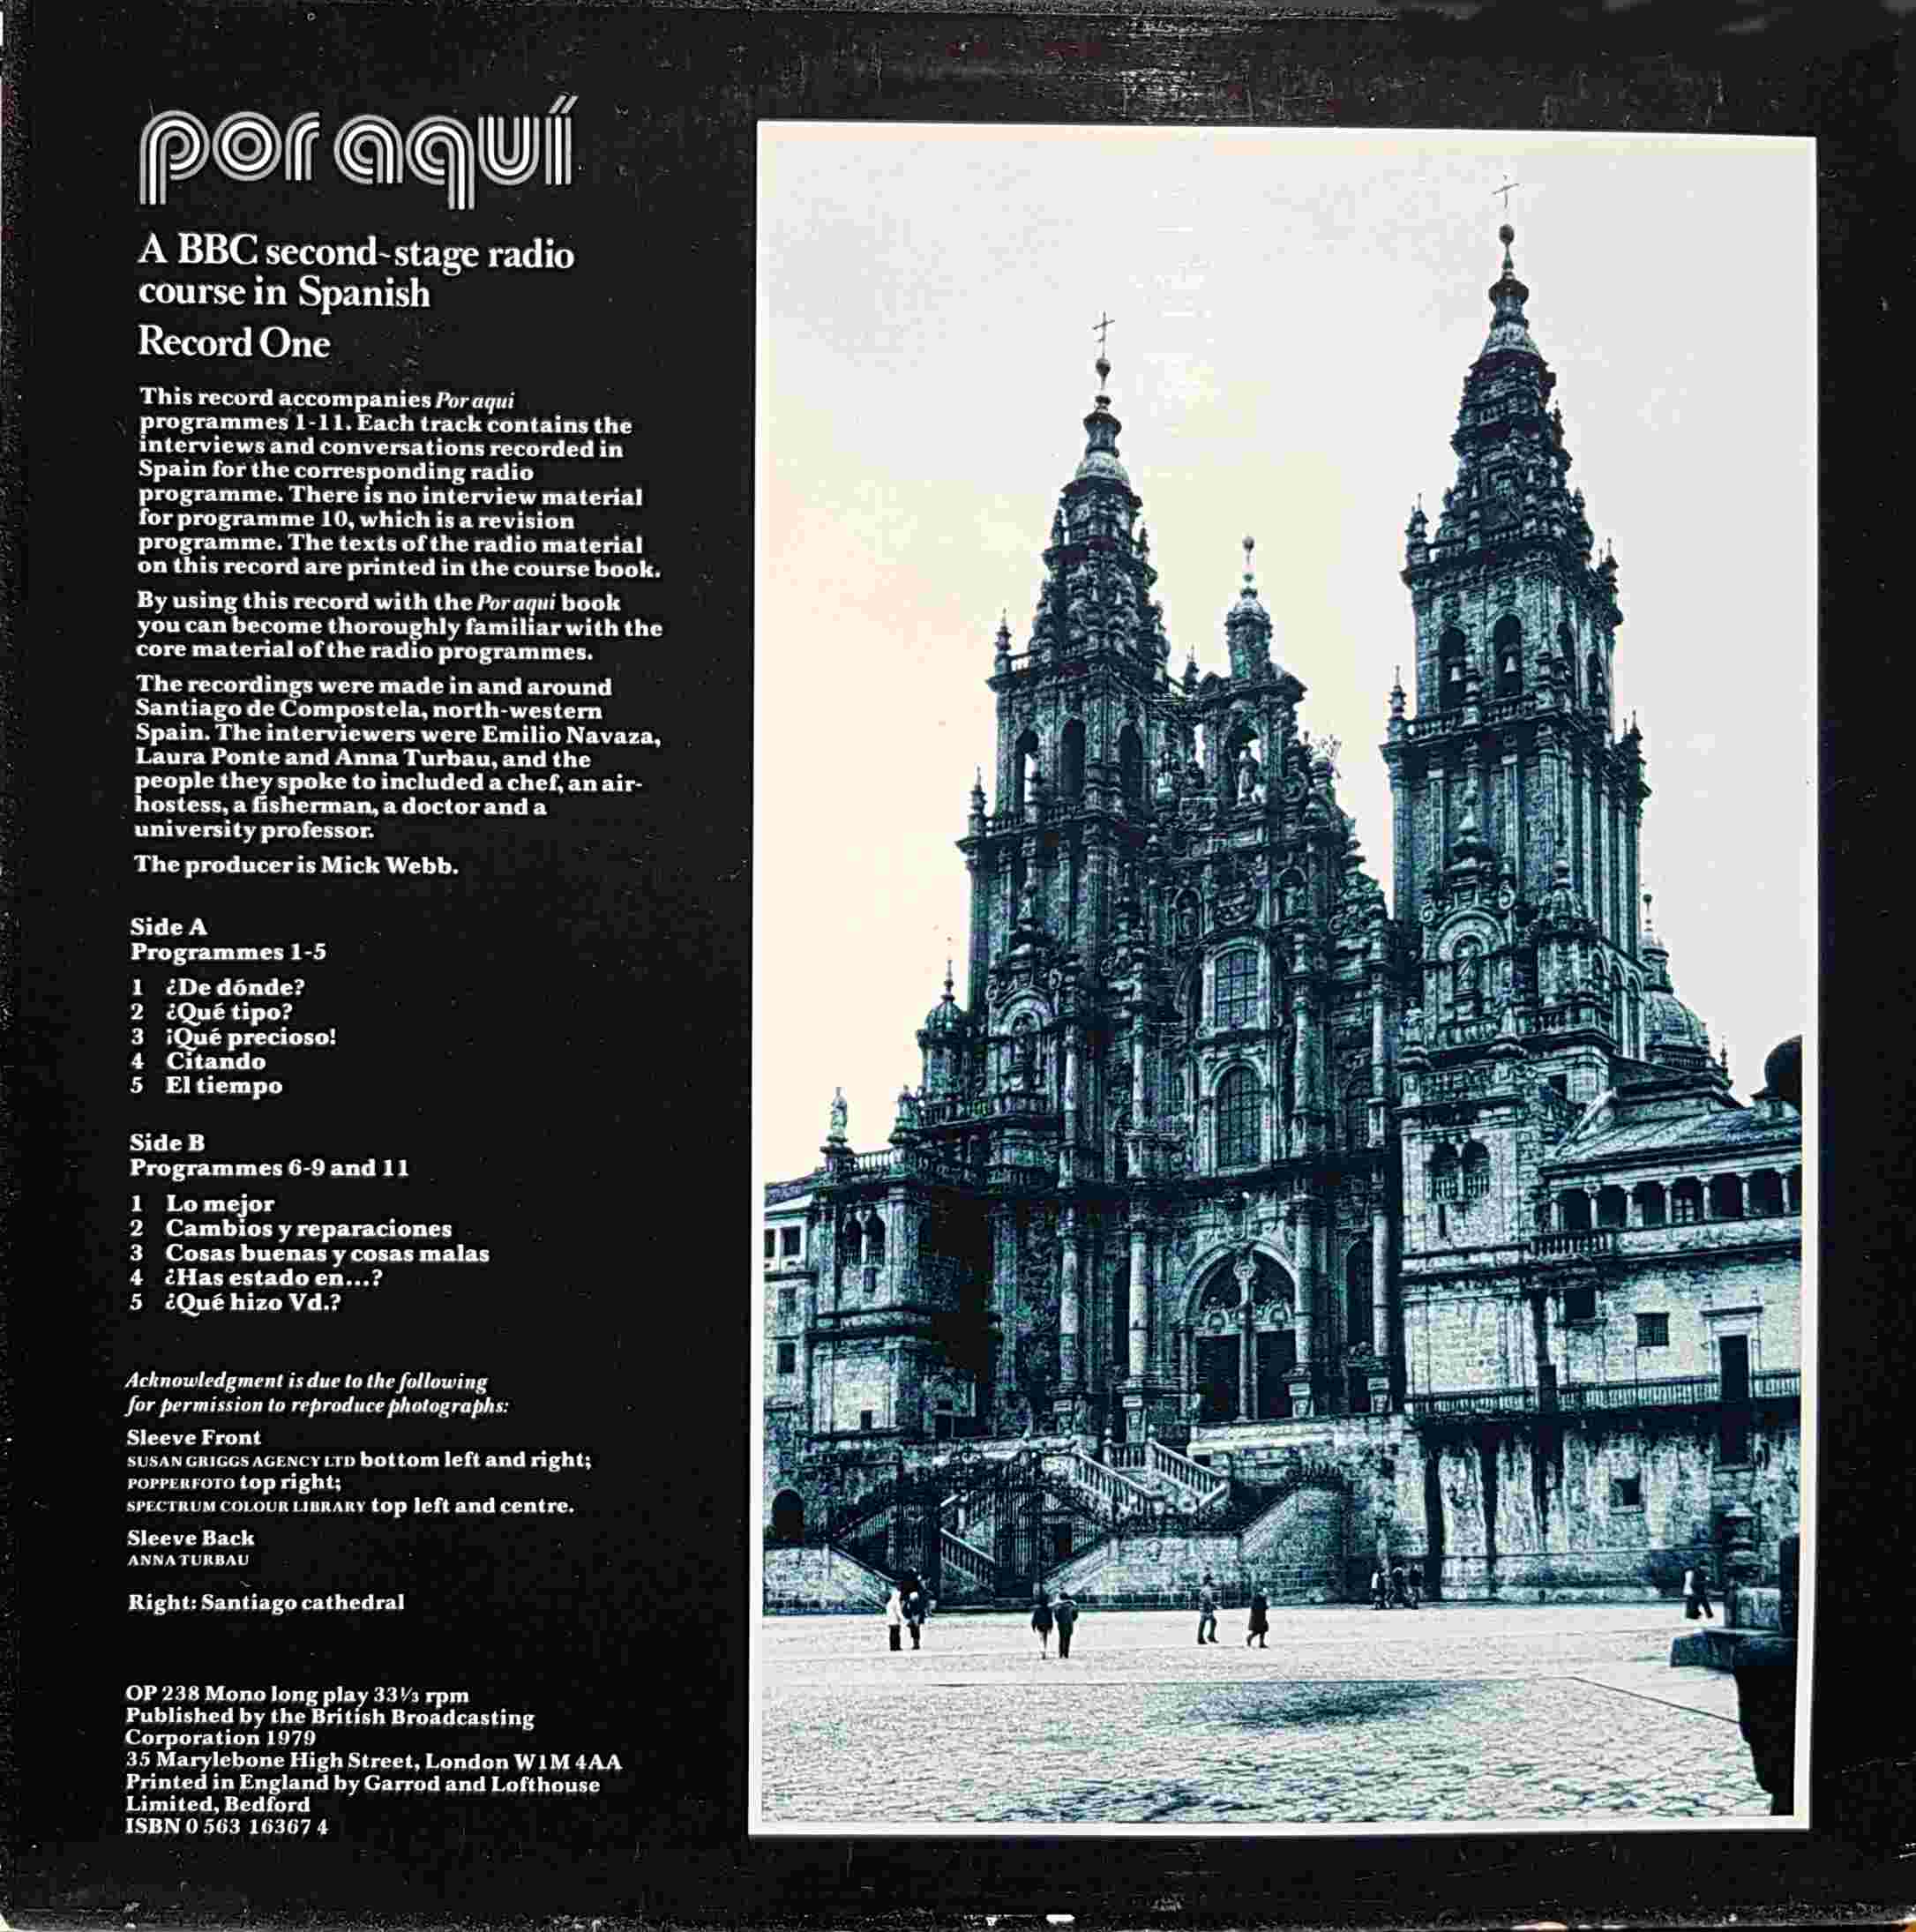 Picture of OP 238 Por aqui - A BBC second-stage radio course in Spanish - Record 1 - Programmes 1 - 11 by artist Various from the BBC records and Tapes library